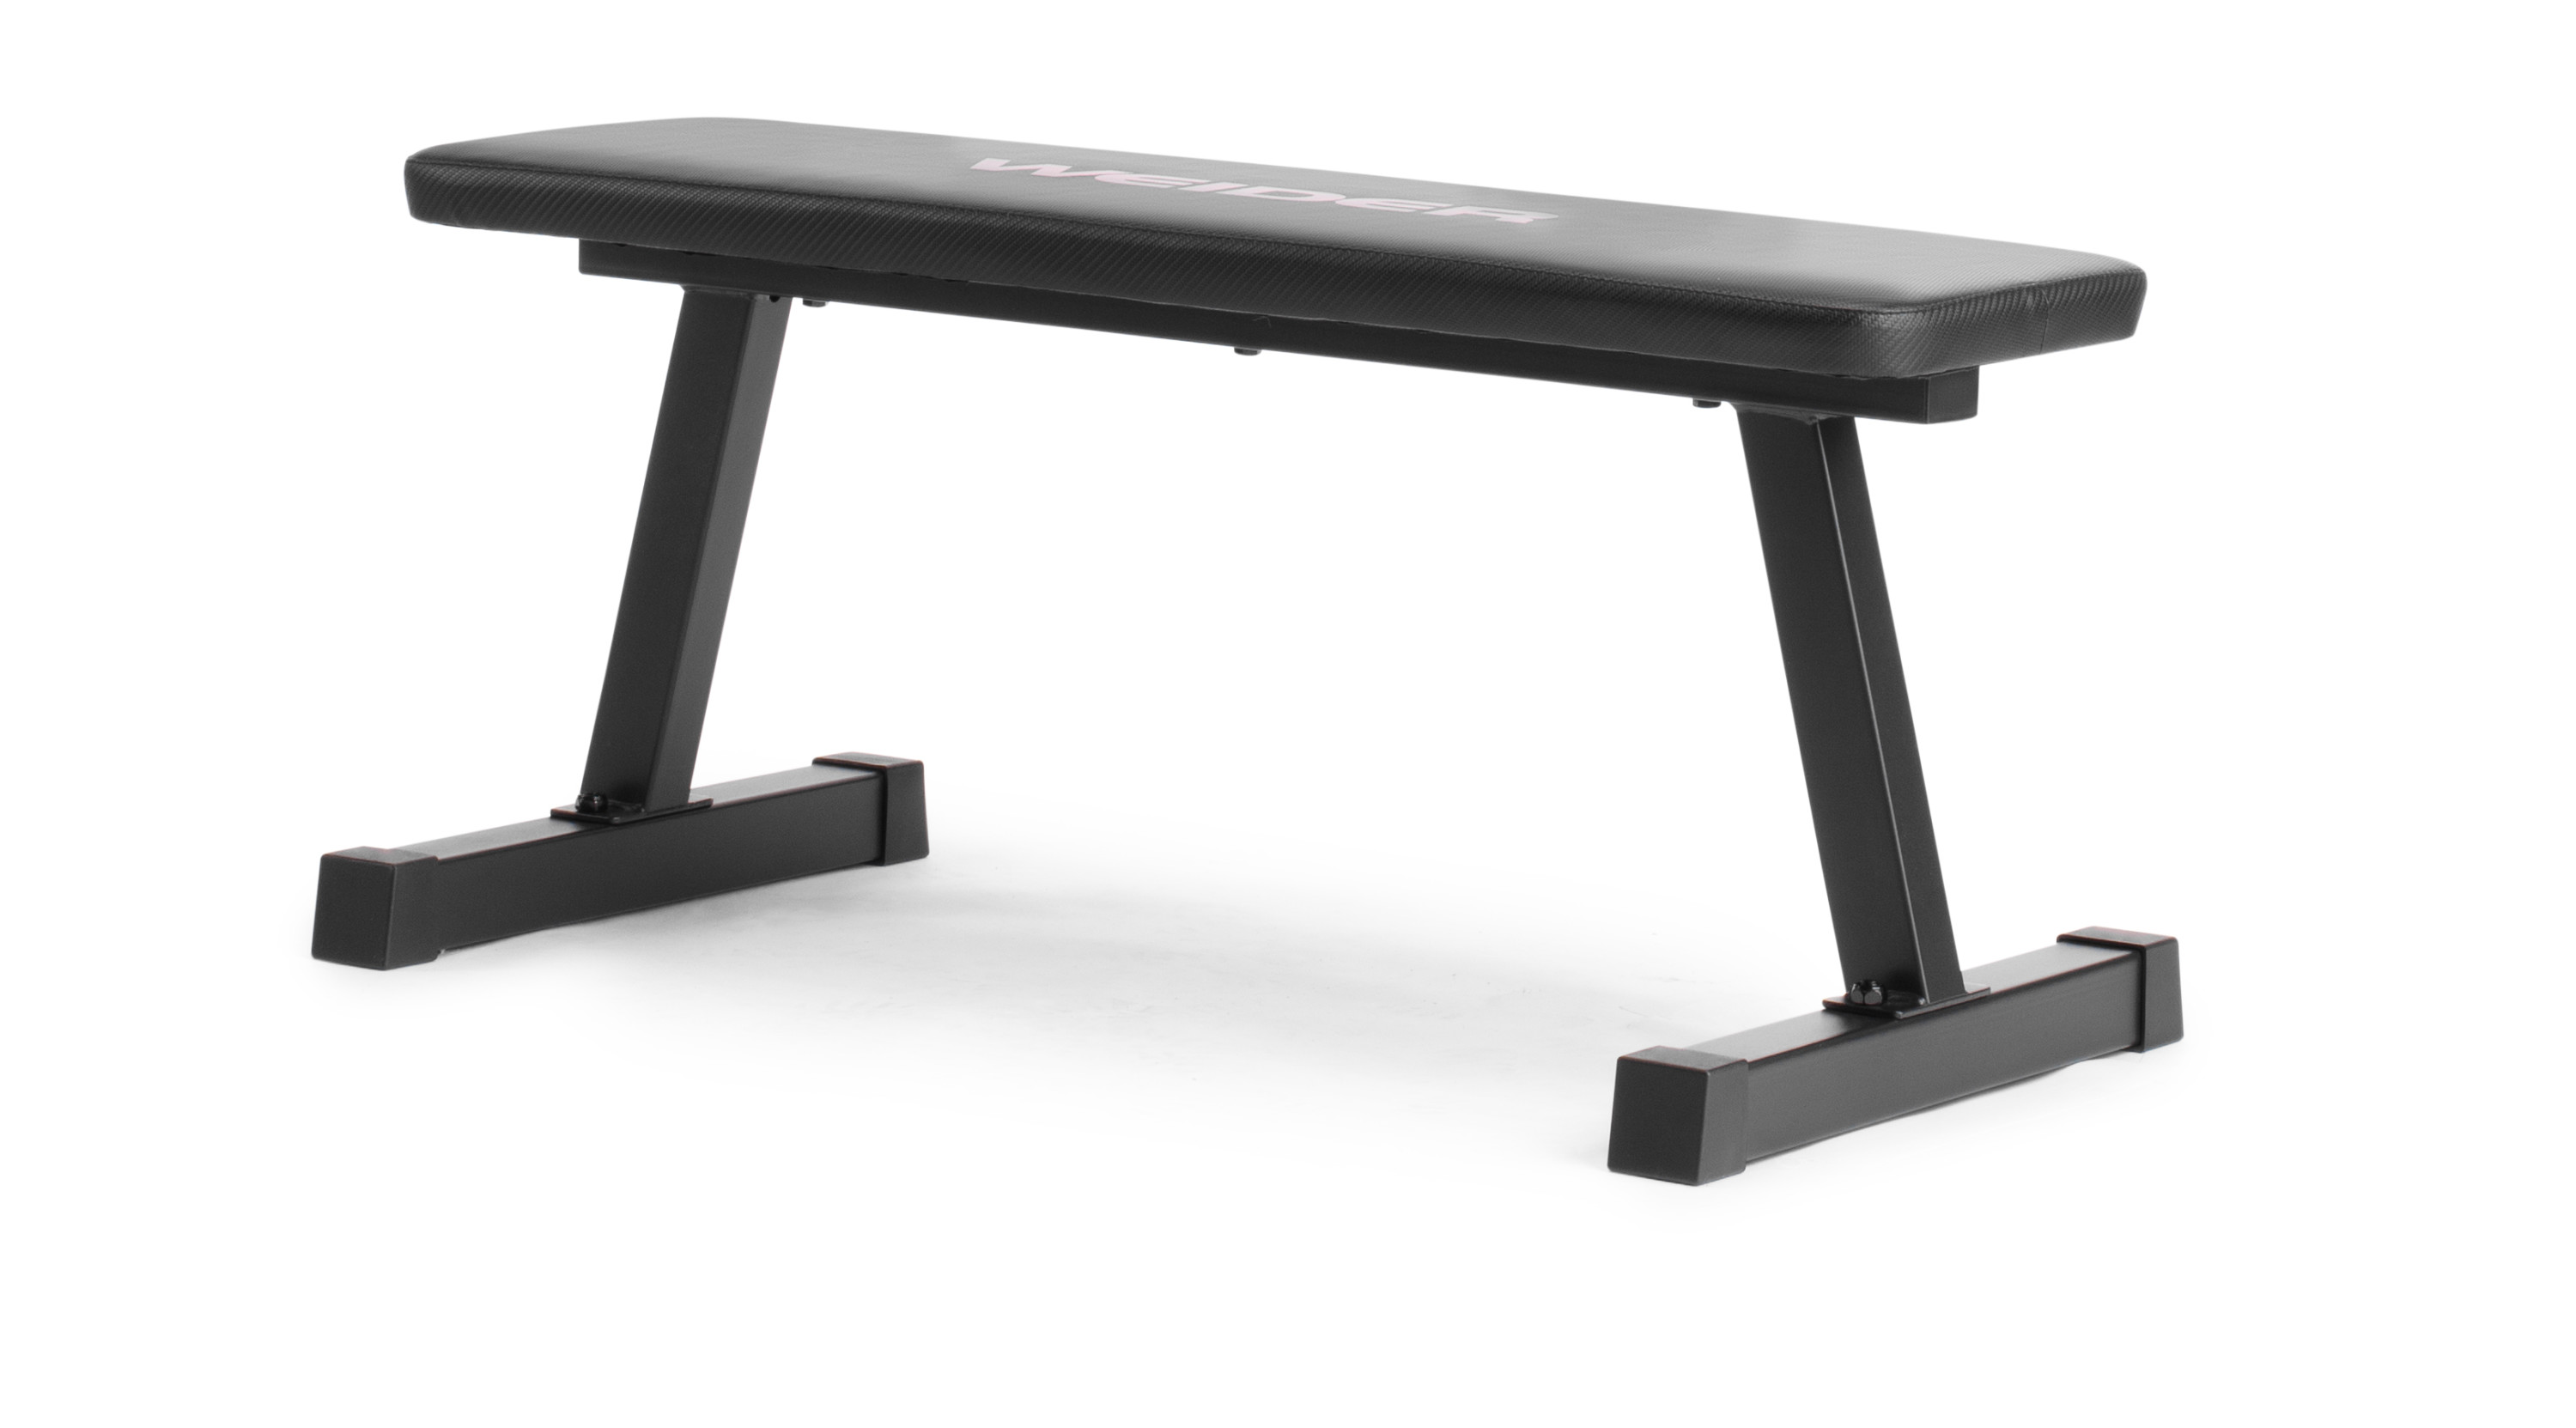 Weider Traditional Flat Bench with a Sewn Vinyl Seat, 460 lb. Weight Limit - image 1 of 13